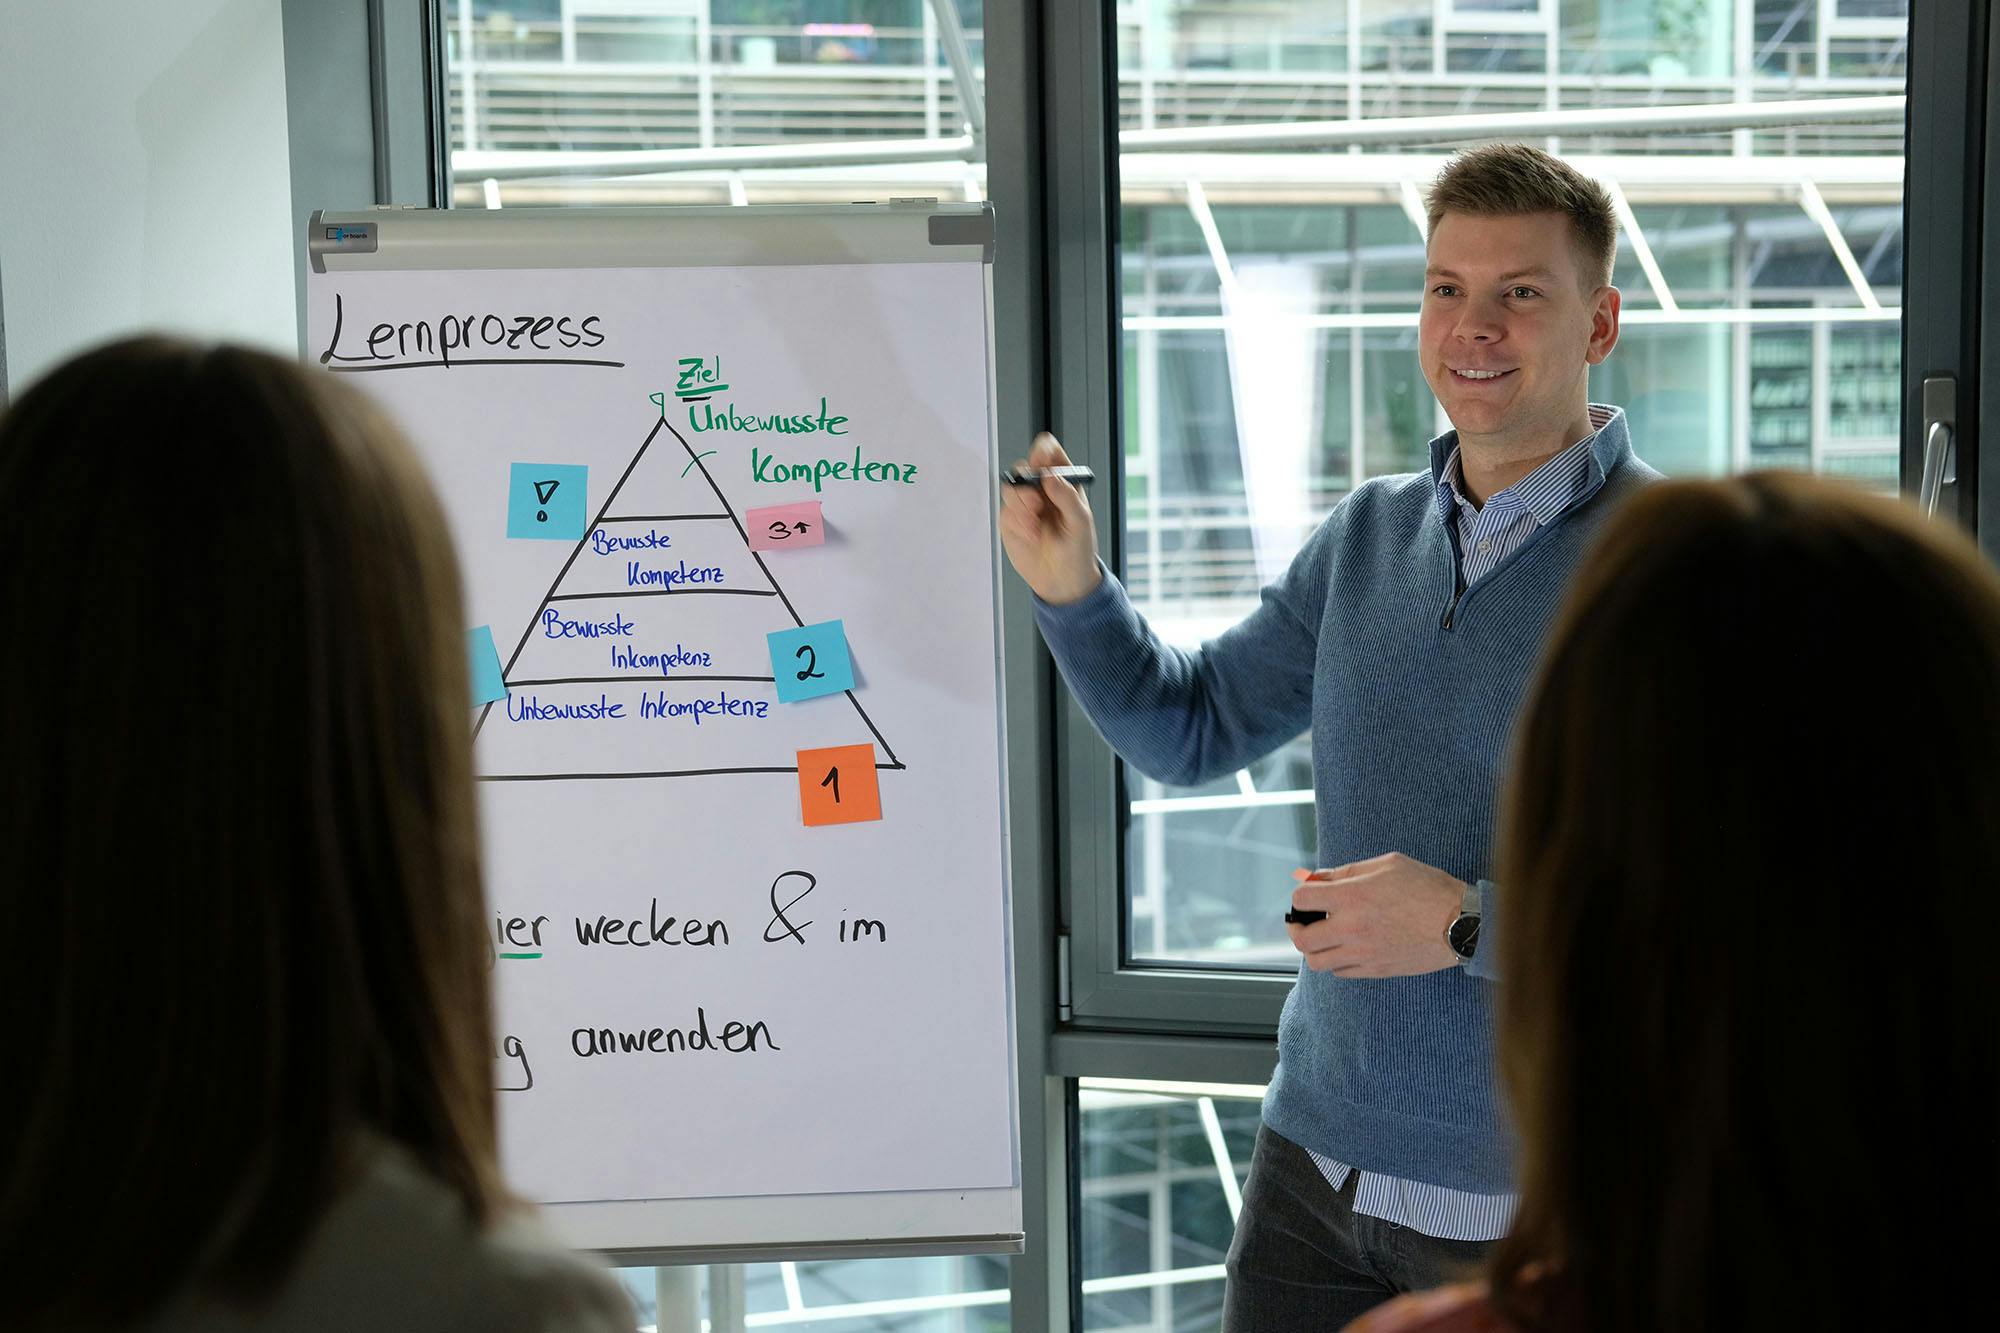 Man shows learning process on a flipchart